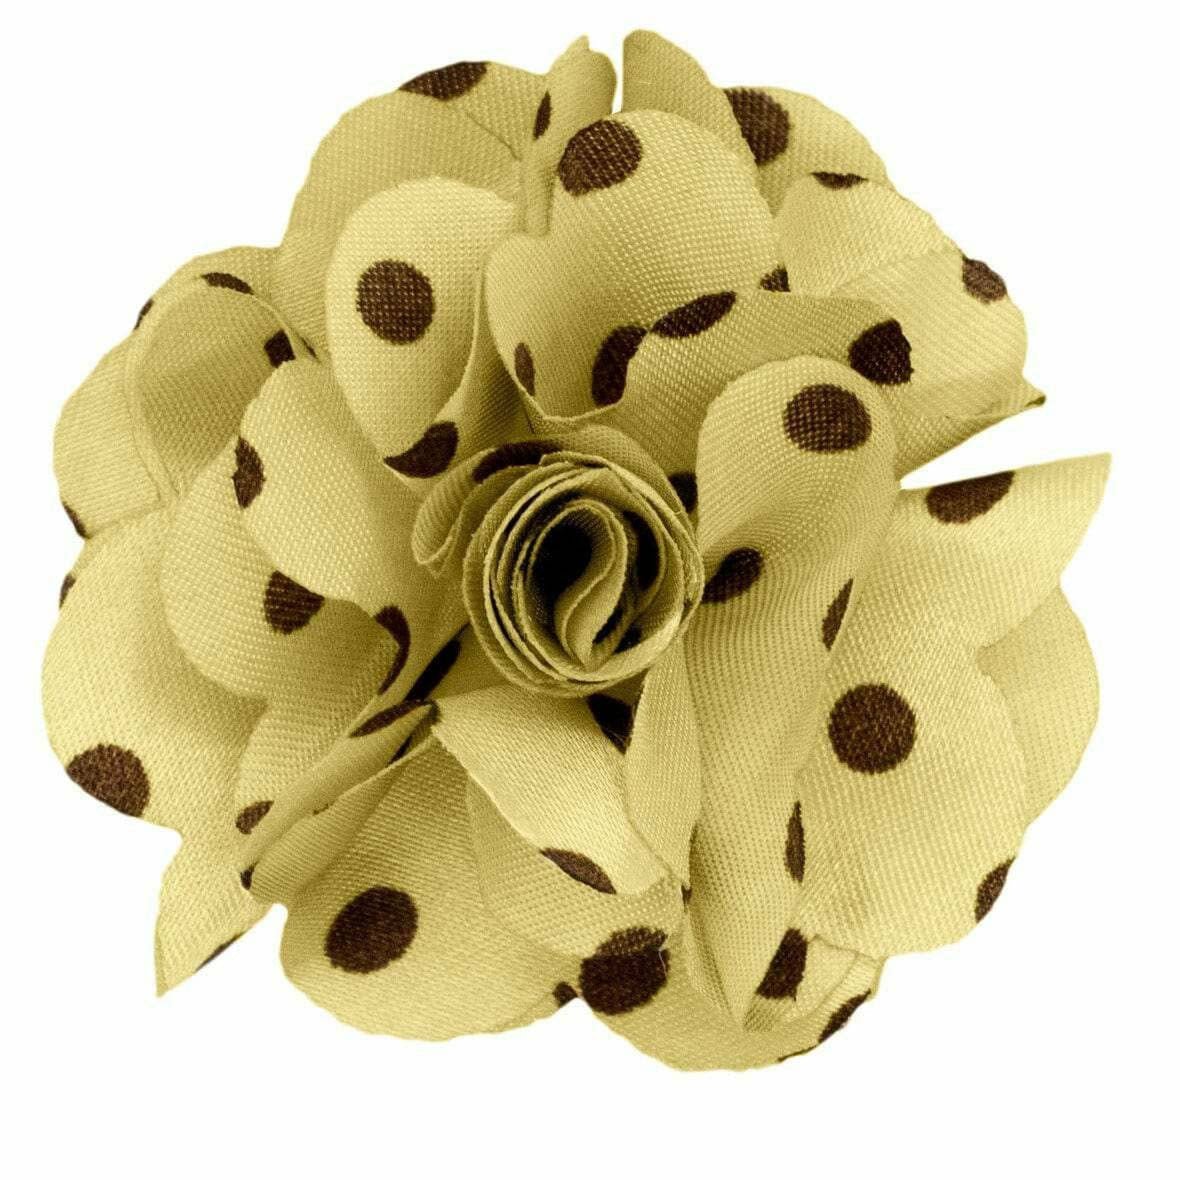 Vittorio Vico Men's Formal Polka Dot Flower Lapel Pin: Flower Pin Suit Accessories Pins for Suit or Tuxedo